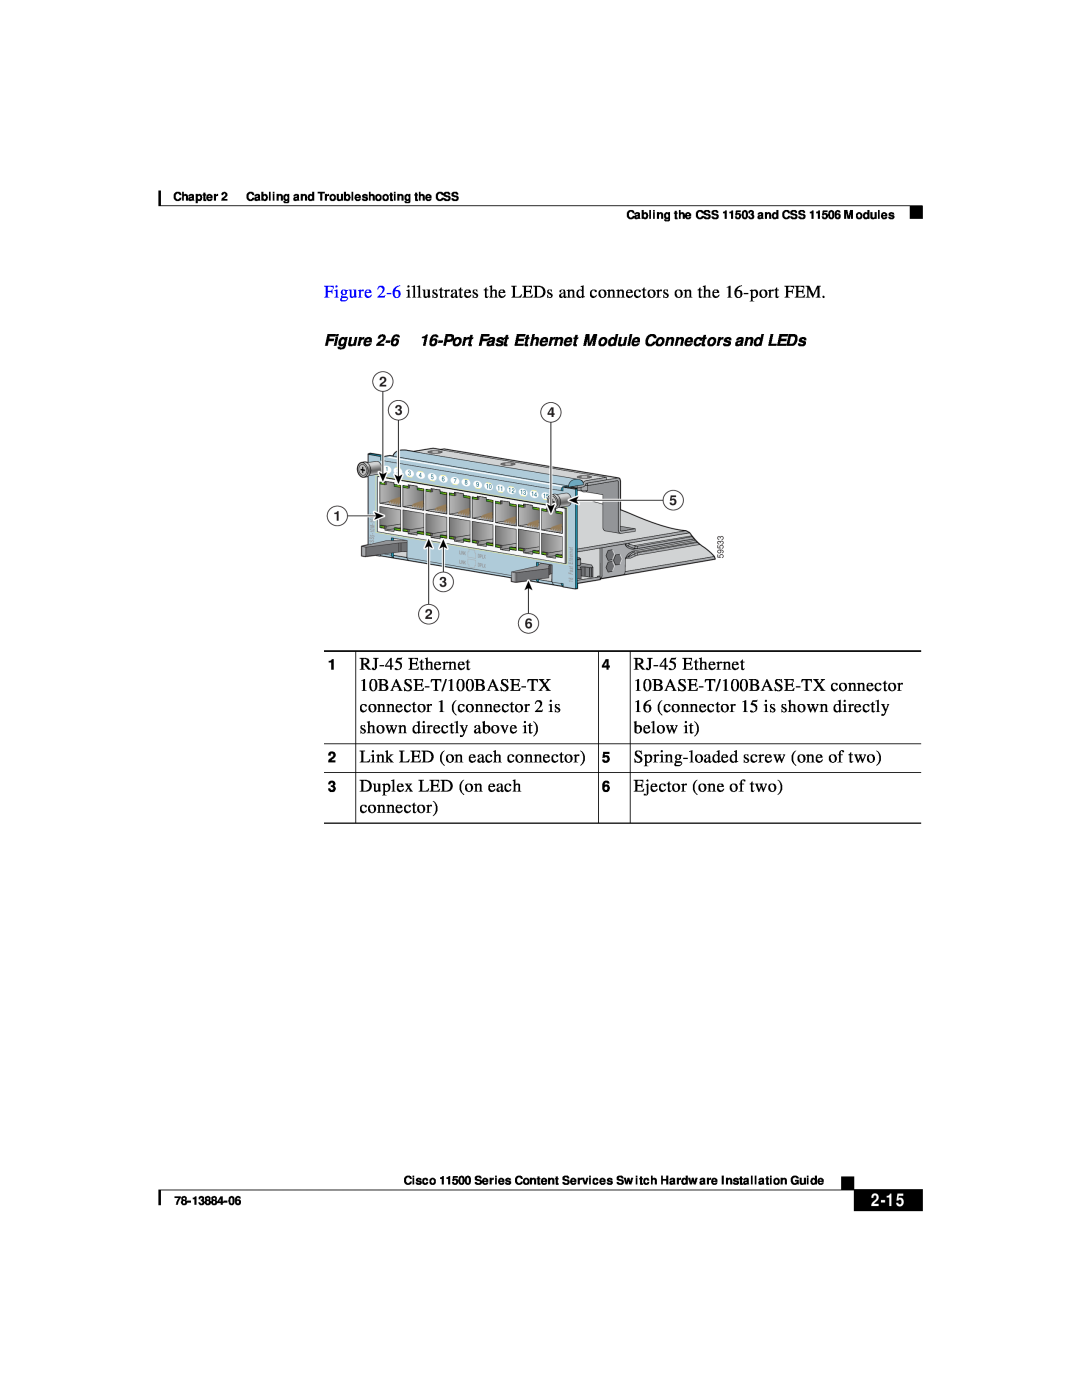 Cisco Systems 11500 Series manual 2-15, 6 16-Port Fast Ethernet Module Connectors and LEDs 